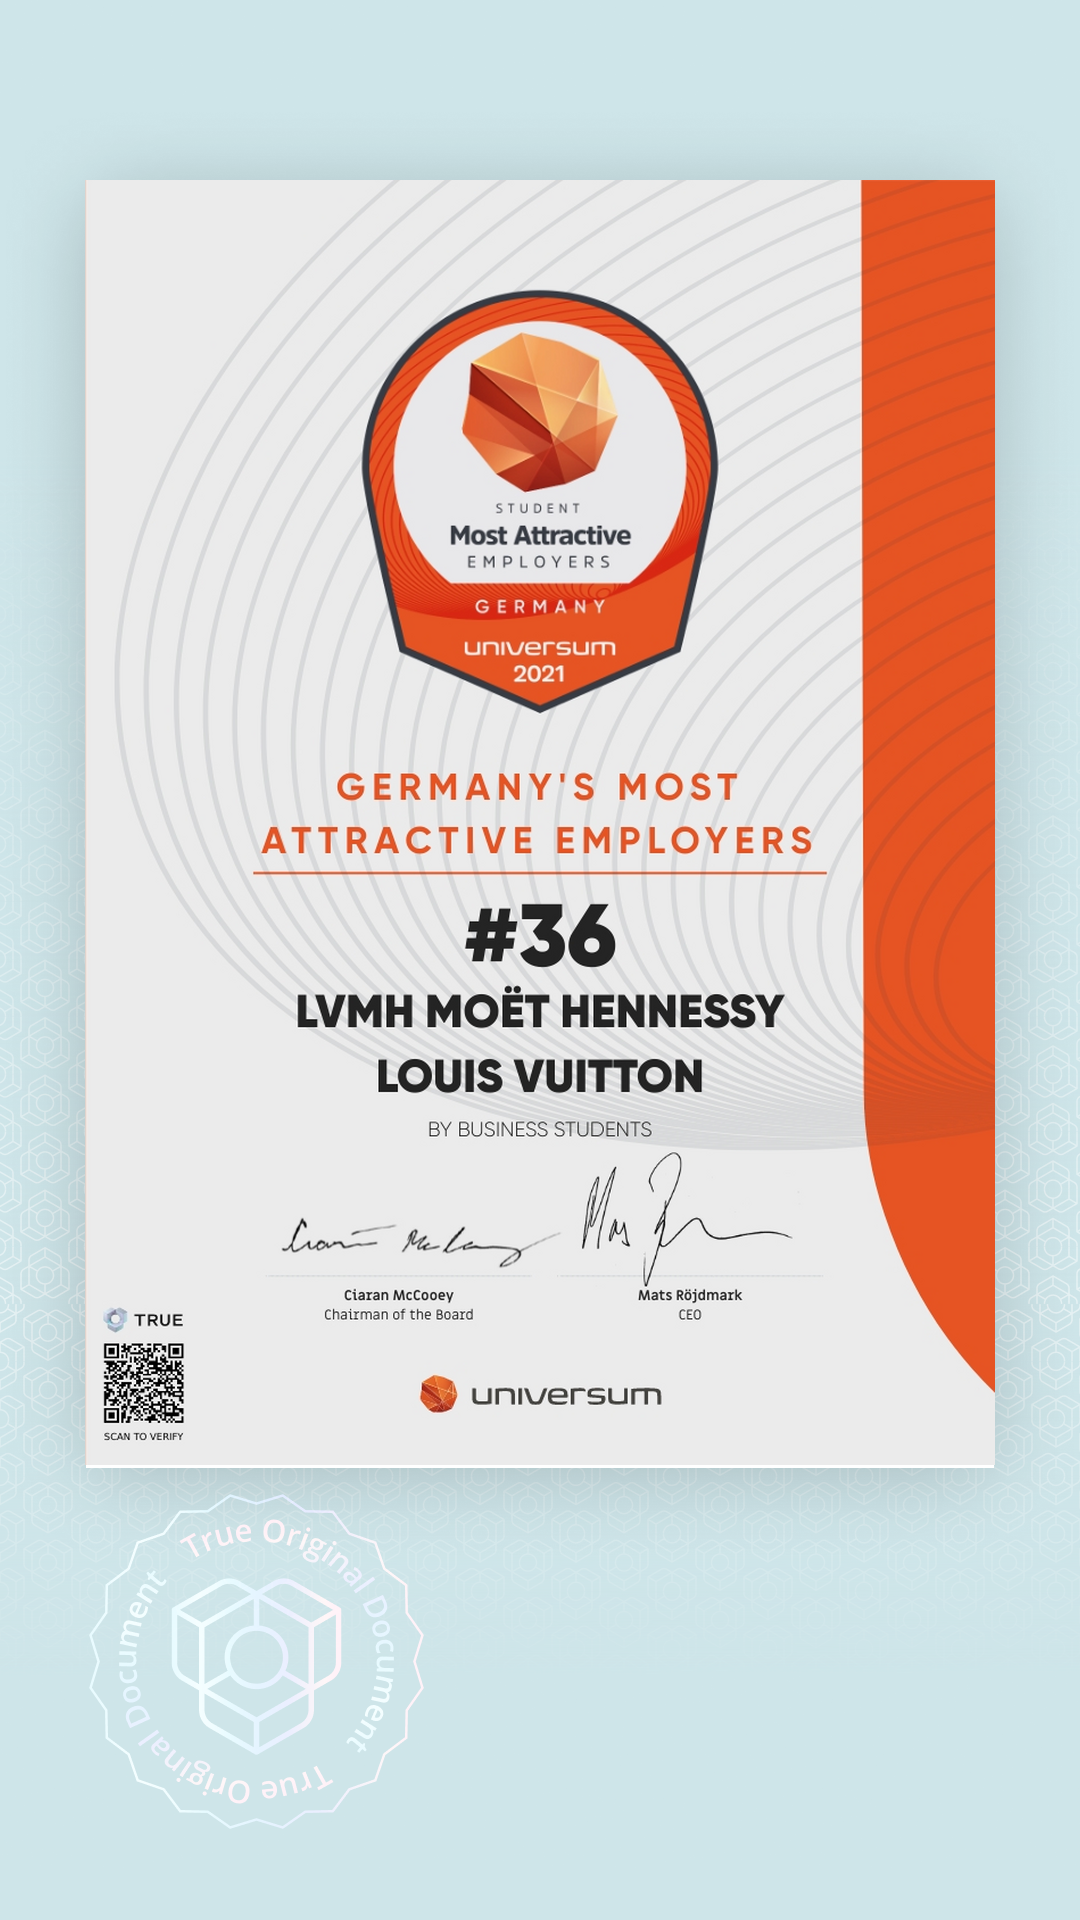 Universum - Recognition issued to LVMH Moët Hennessy Louis Vuitton